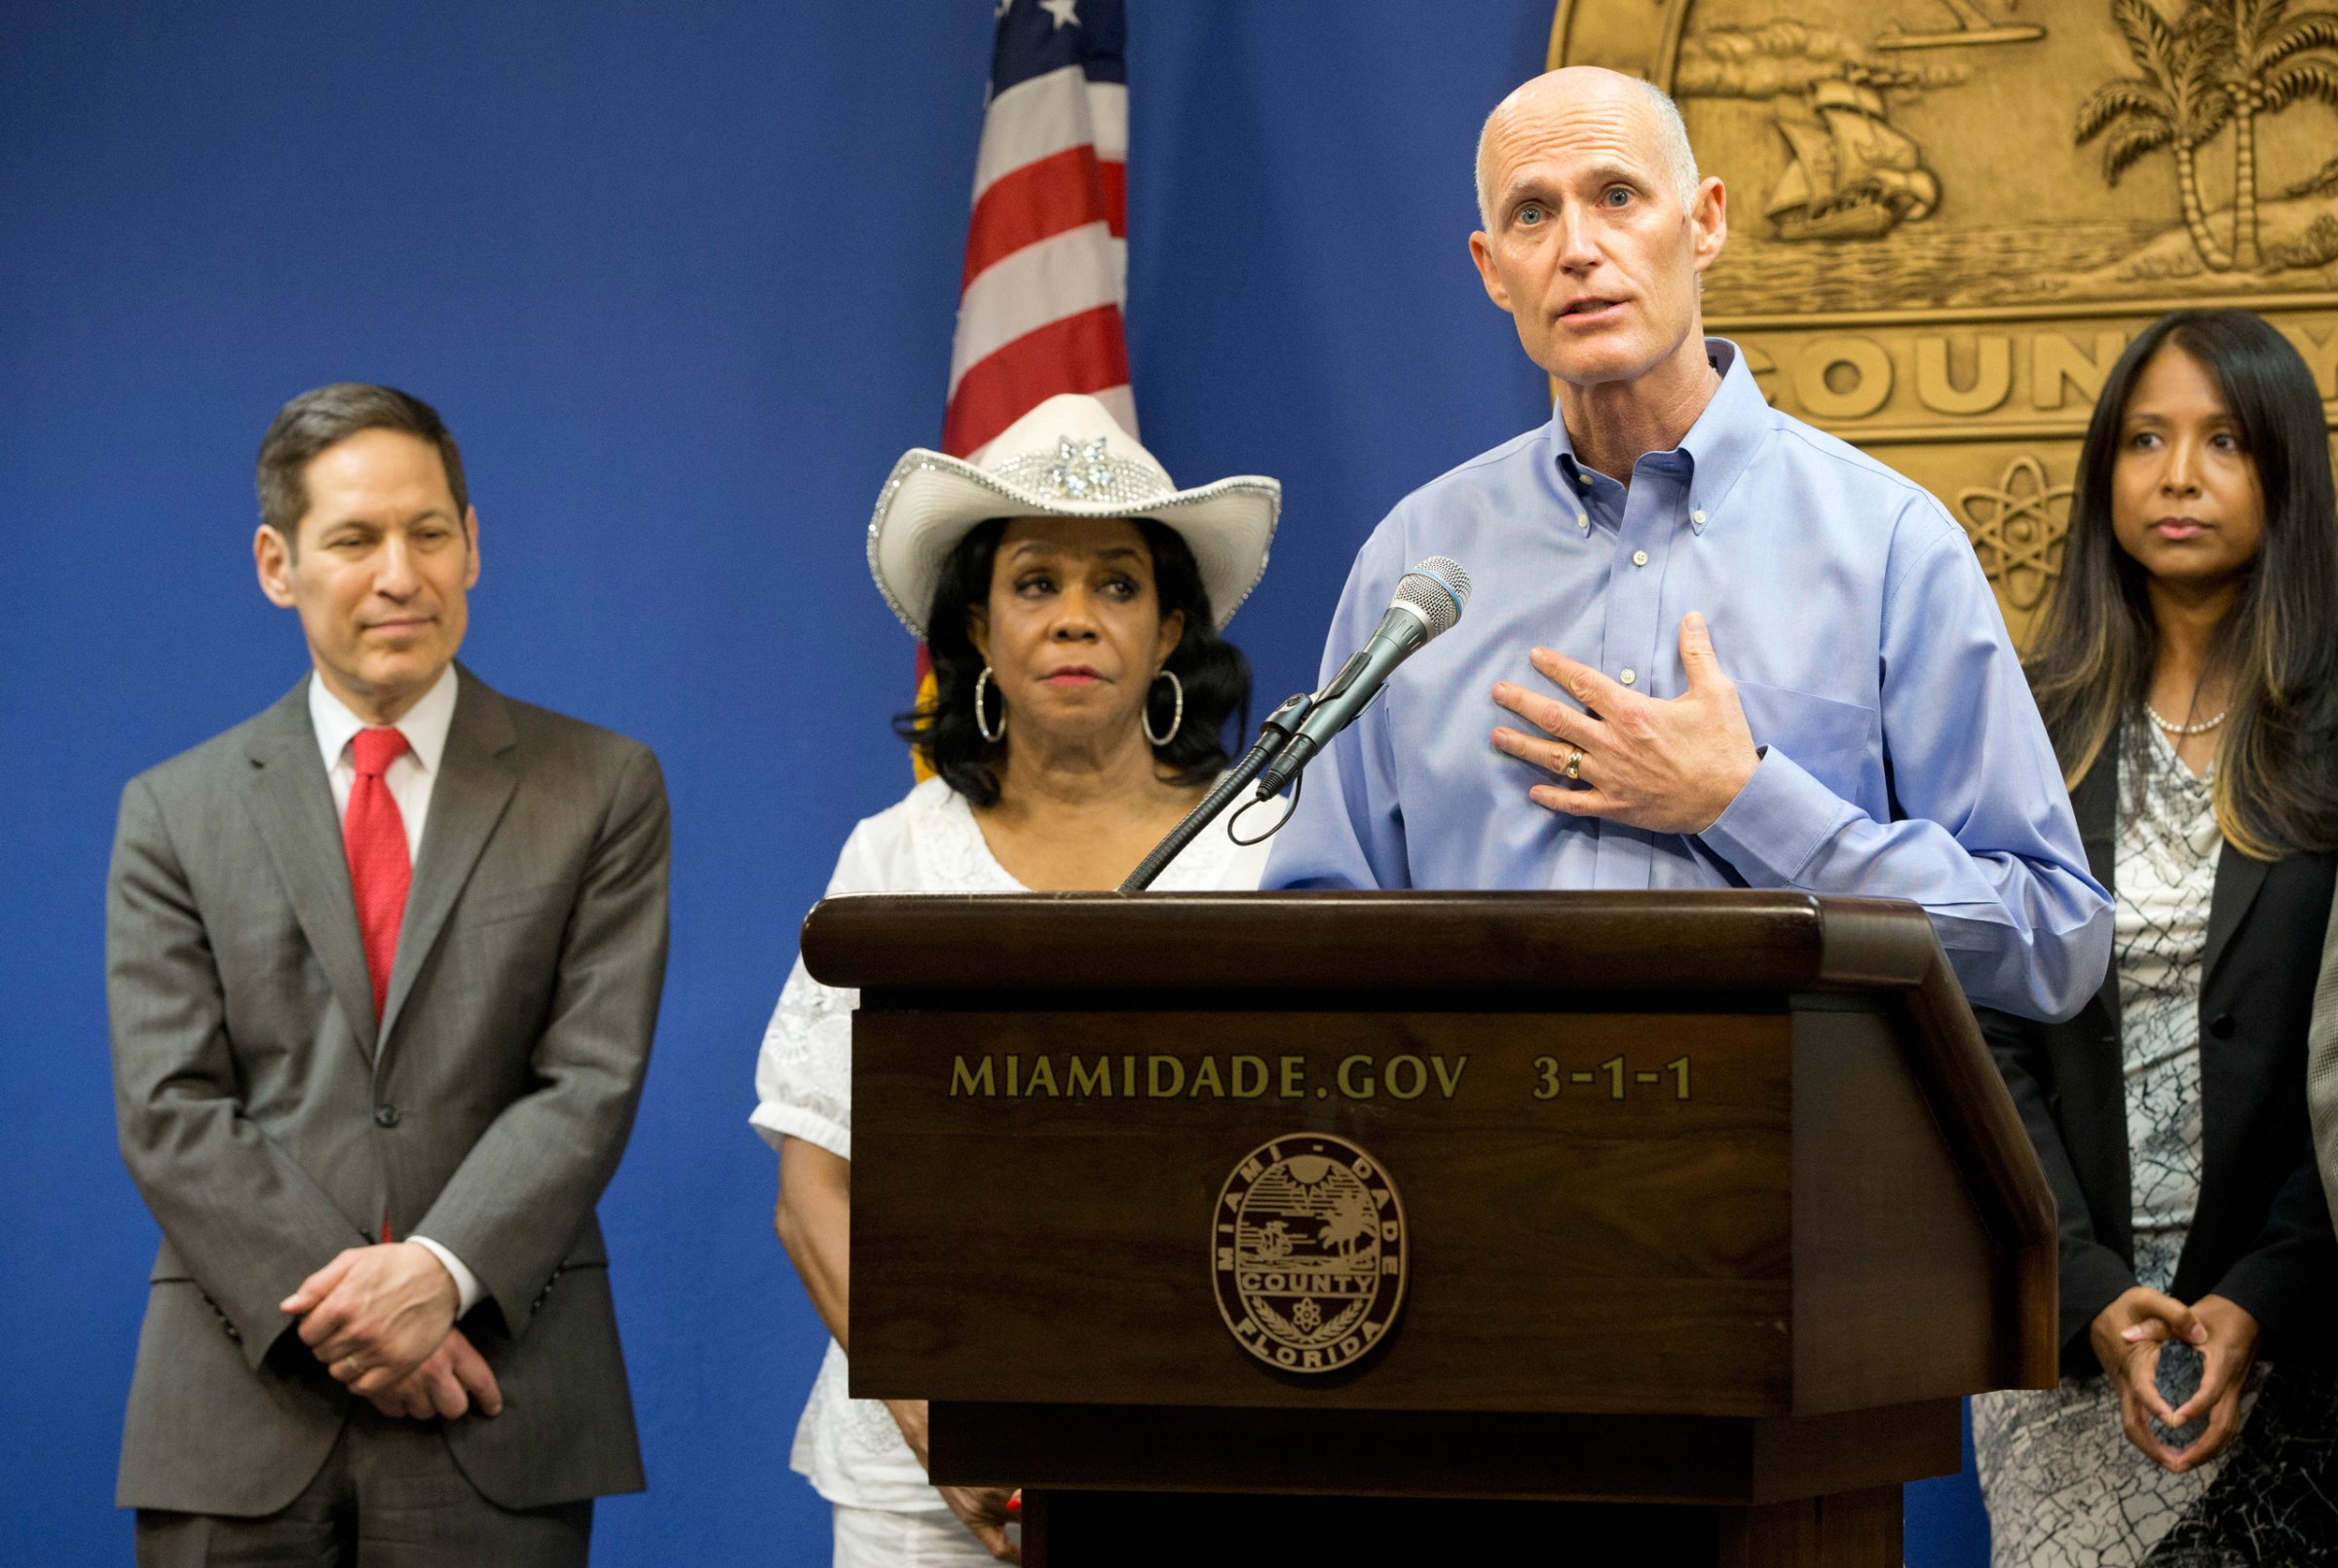 Florida Gov. Rick Scott, foreground, speaks during a news conference along with Centers for Disease Control and Prevention Director Dr. Tom Frieden, left, Rep. Frederica Wilson, D-FL, and Fla. Surgeon General and Secretary, Dr. Celeste Philip, far right, Thursday, Aug. 4, 2016, in Doral, Fla. The CDC has warned expectant mothers to steer clear of the city's Wynwood neighborhood, where at least 15 people are believed to have been infected with the Zika virus through mosquito bites in the first such cases on record in the mainland U.S. (AP Photo/Wilfredo Lee)